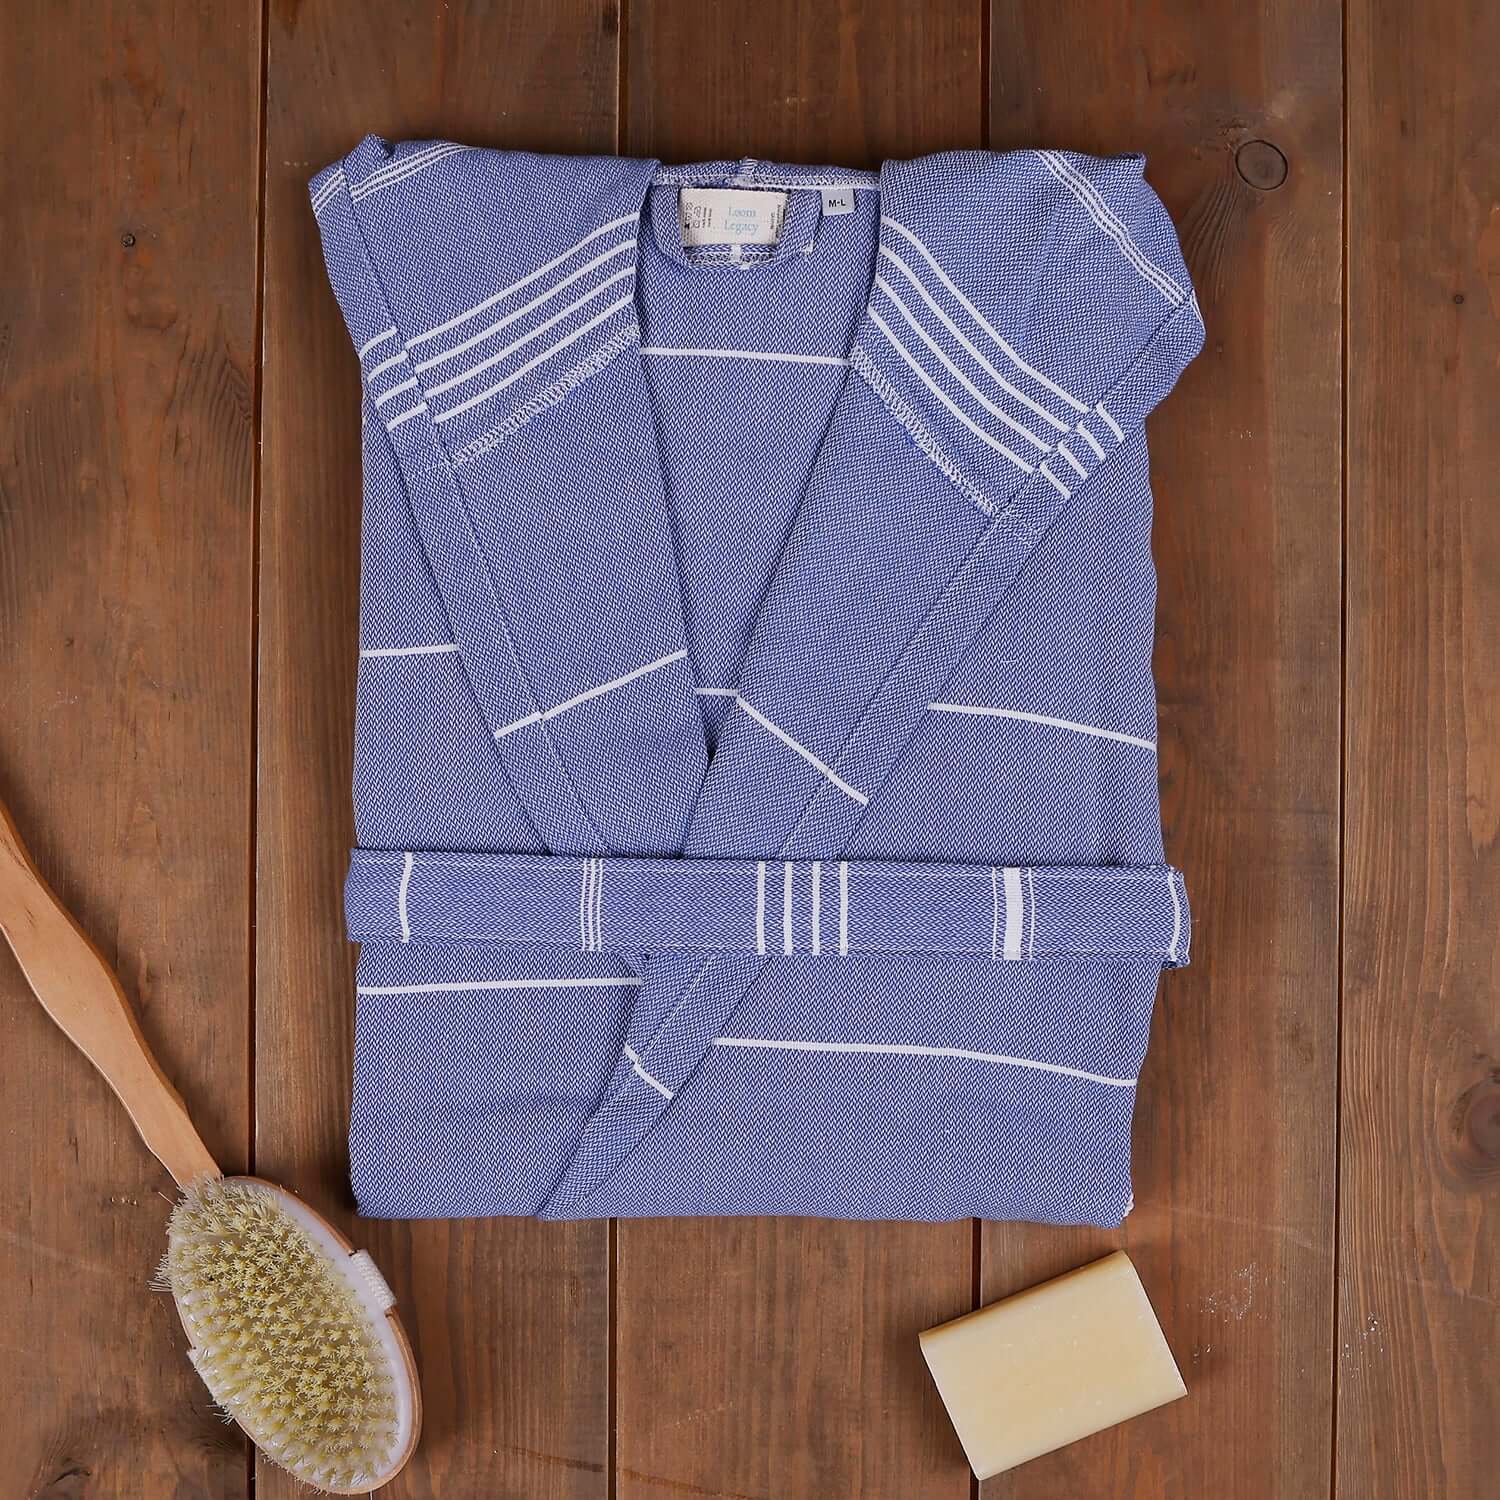 Blue xsmall/small 'The Loom Legacy' bathrobe with white patterns on a wooden surface, accompanied by a bristle brush and soap bar.